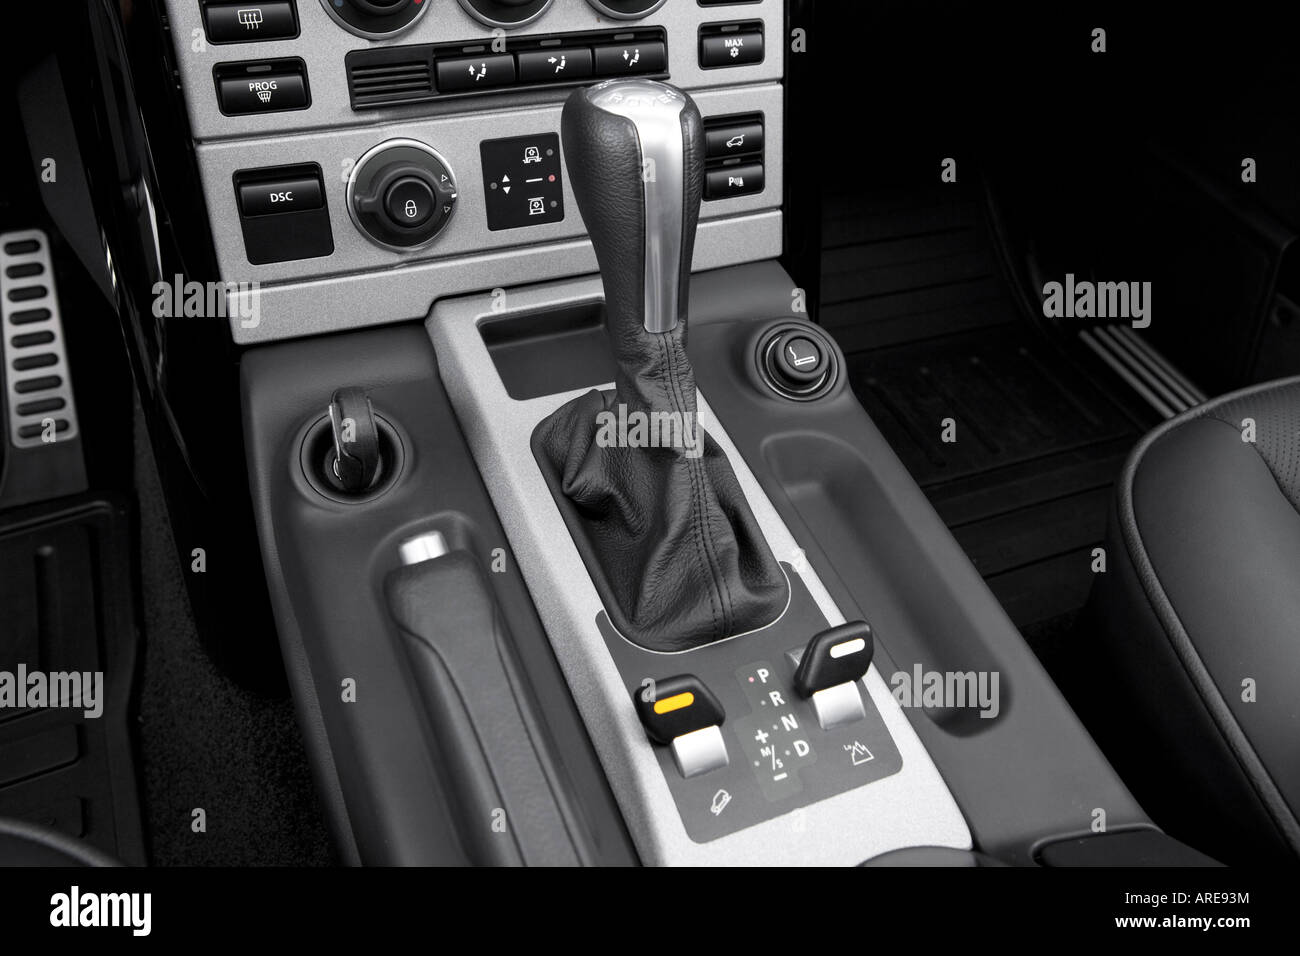 2006 Land Rover Range Rover Supercharged in Black - Gear shifter